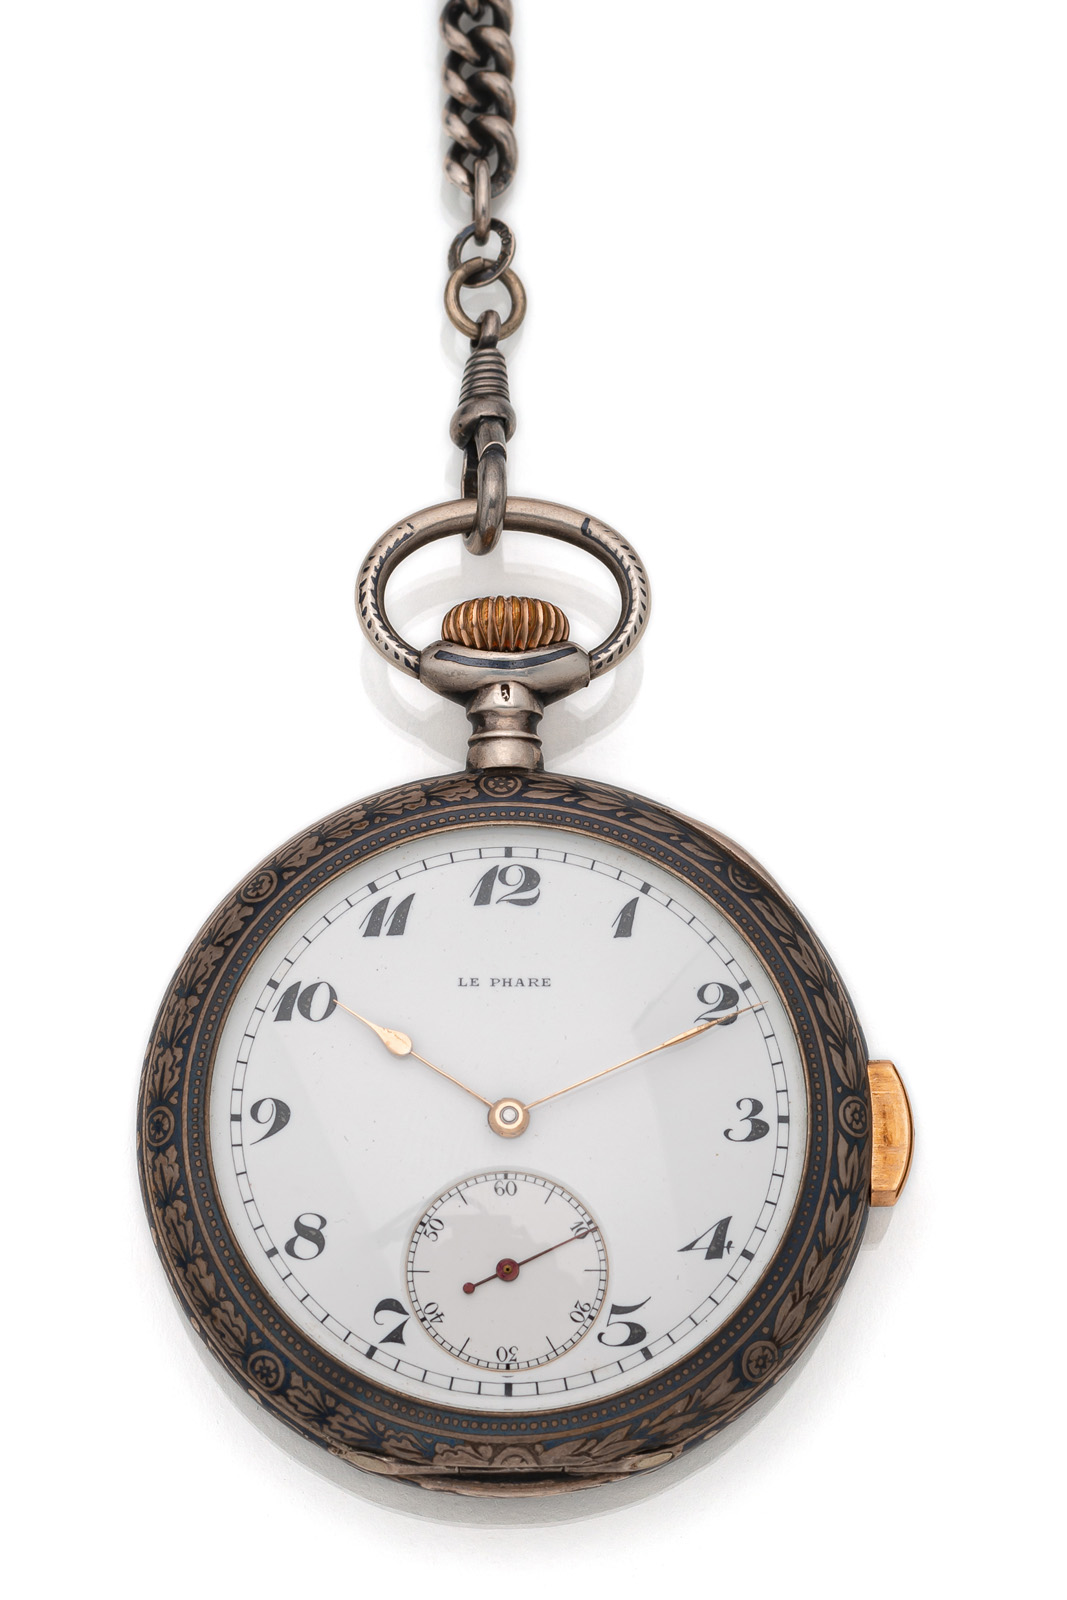 A SWISS POCKET WATCH WITH QUARTER REPETITION - Image 2 of 5